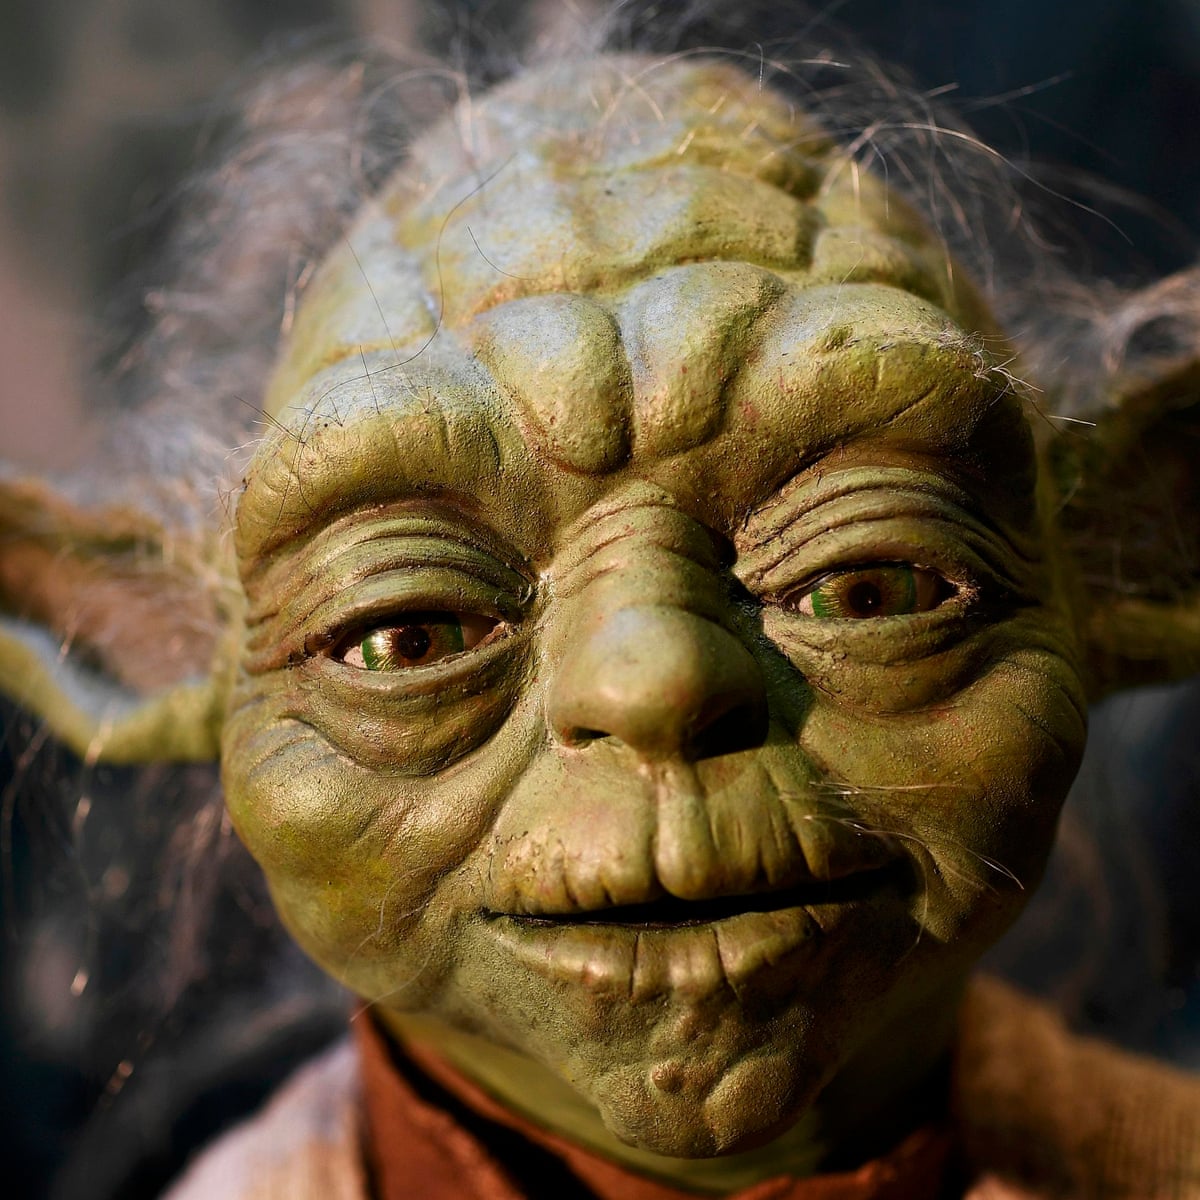 Solve it can you? Speak Yoda how to | Mathematics | The Guardian